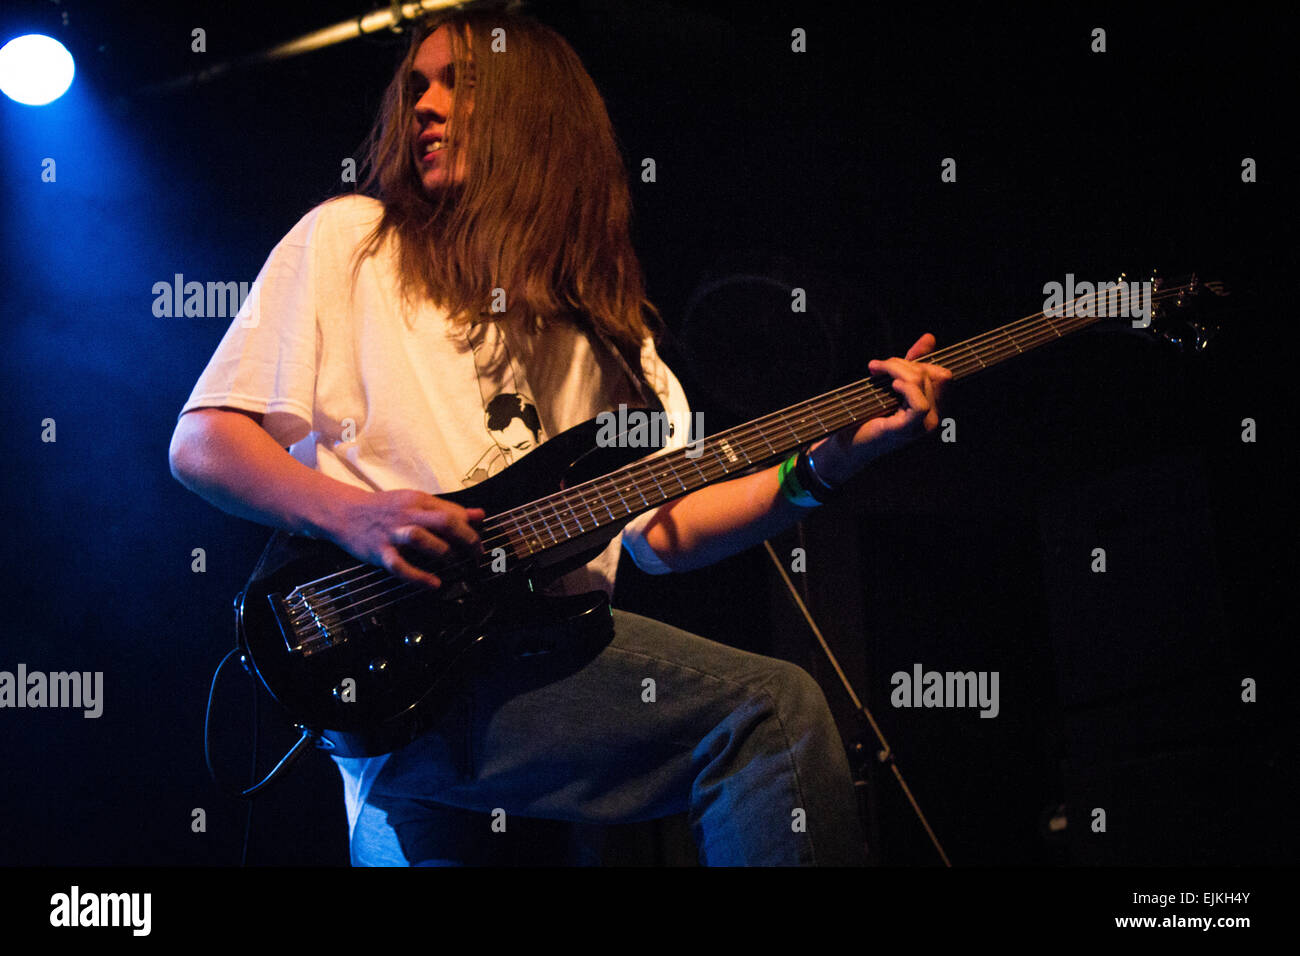 Man with long hair in a band playing a five string bass guitar Stock Photo  - Alamy